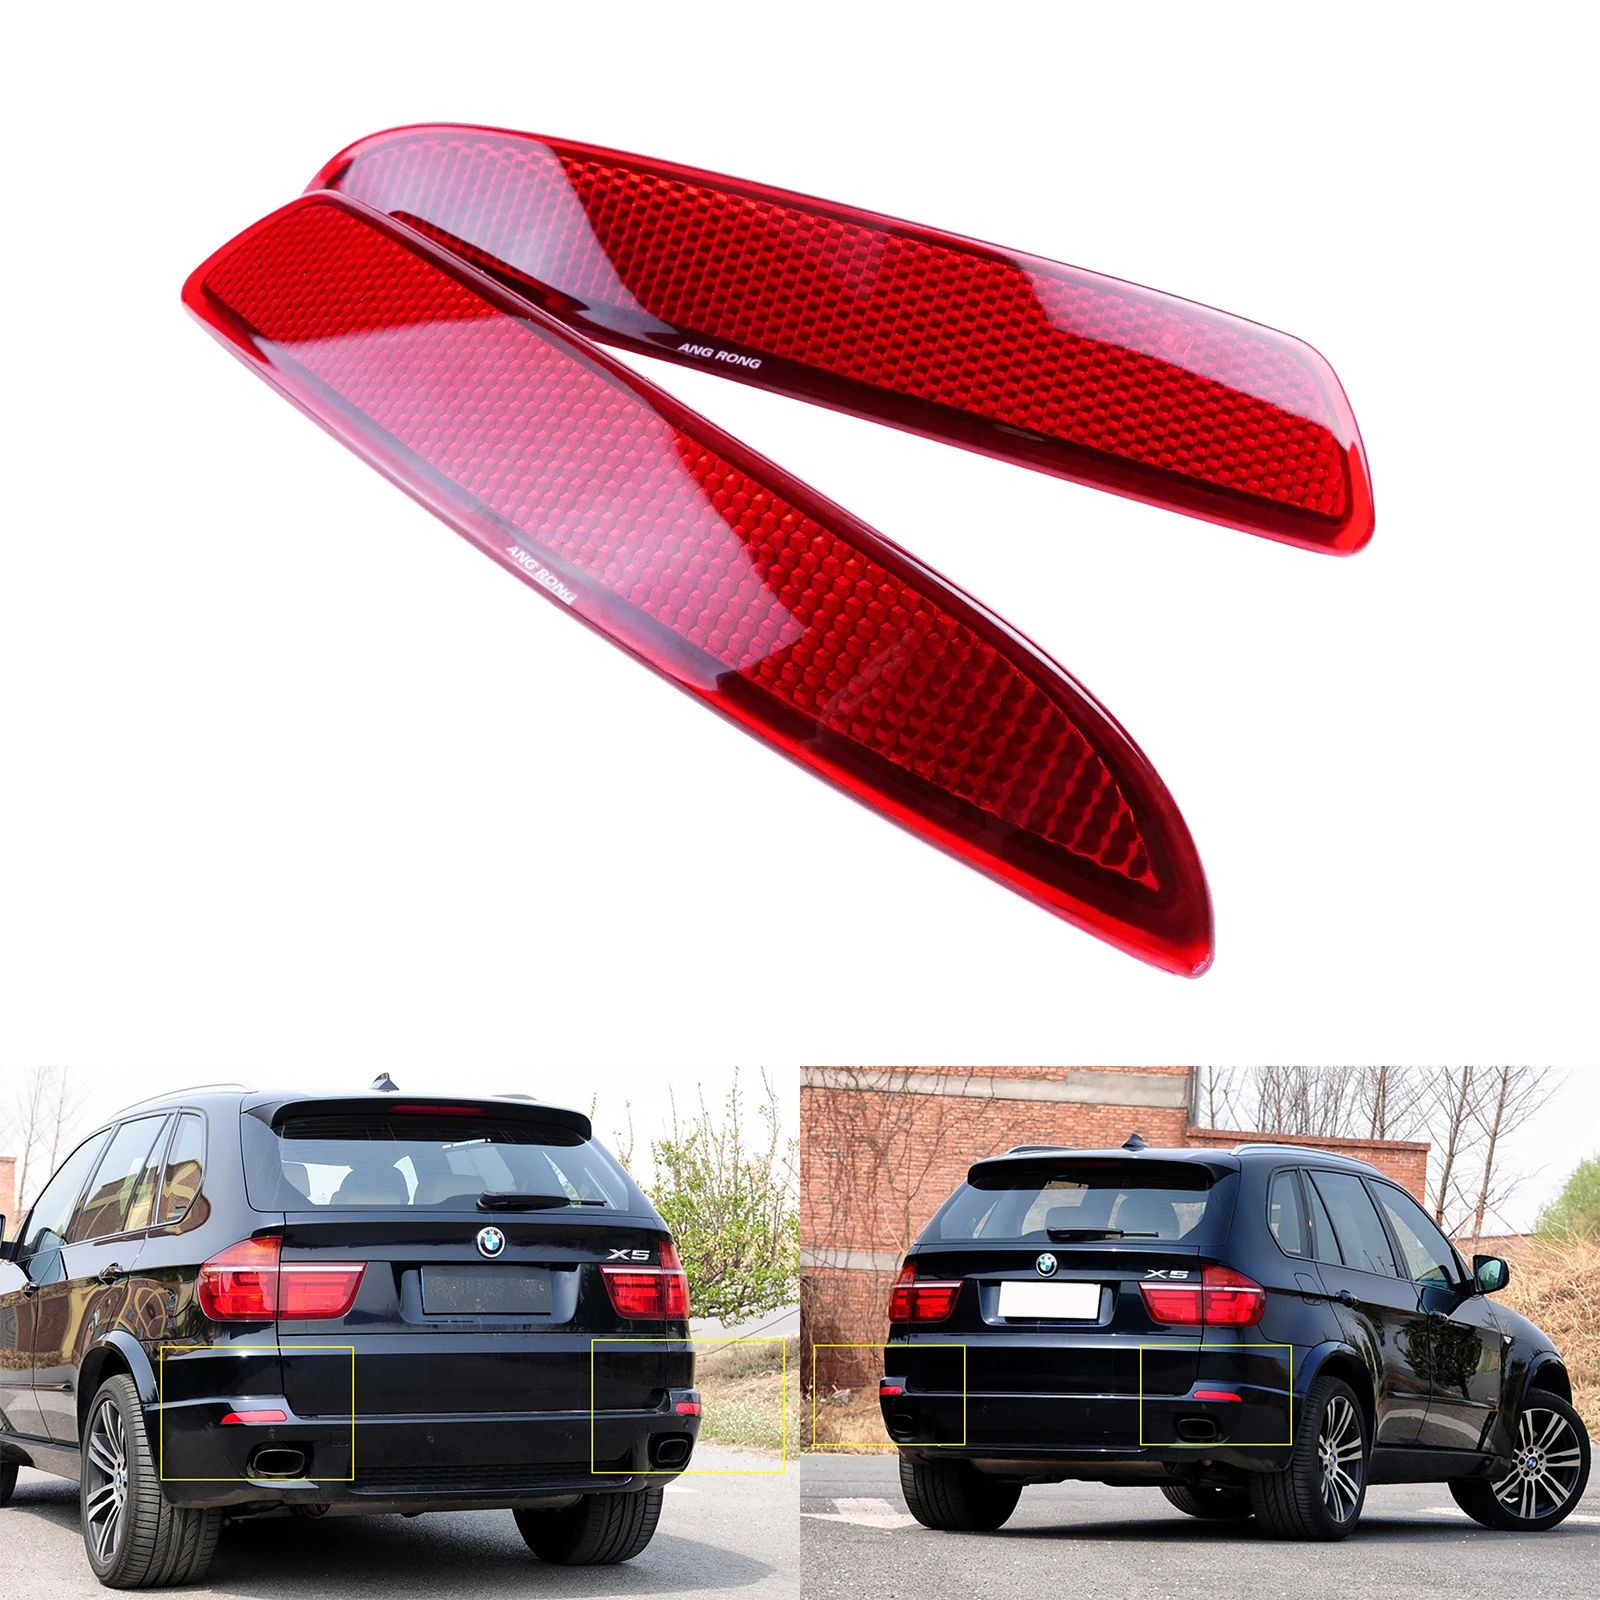 ANGRONG 2x Red Lens Cover Rear Bumper Reflector Left & Right No Bulb For BMW X5 E70 M 2006-2013